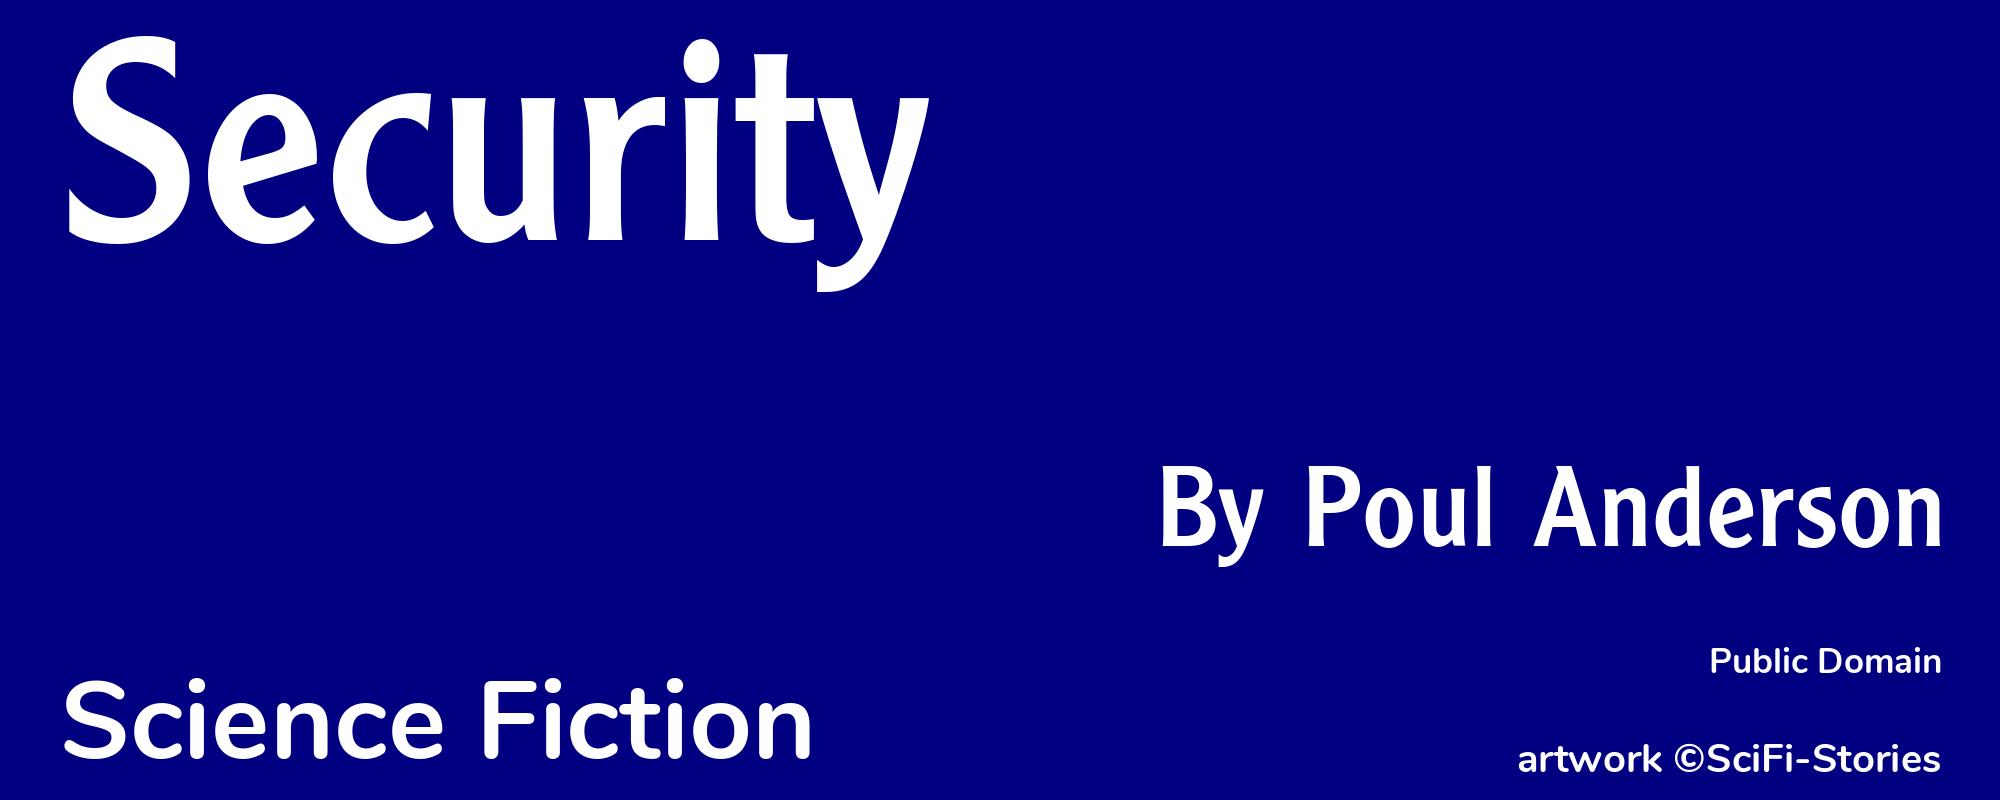 Security - Cover